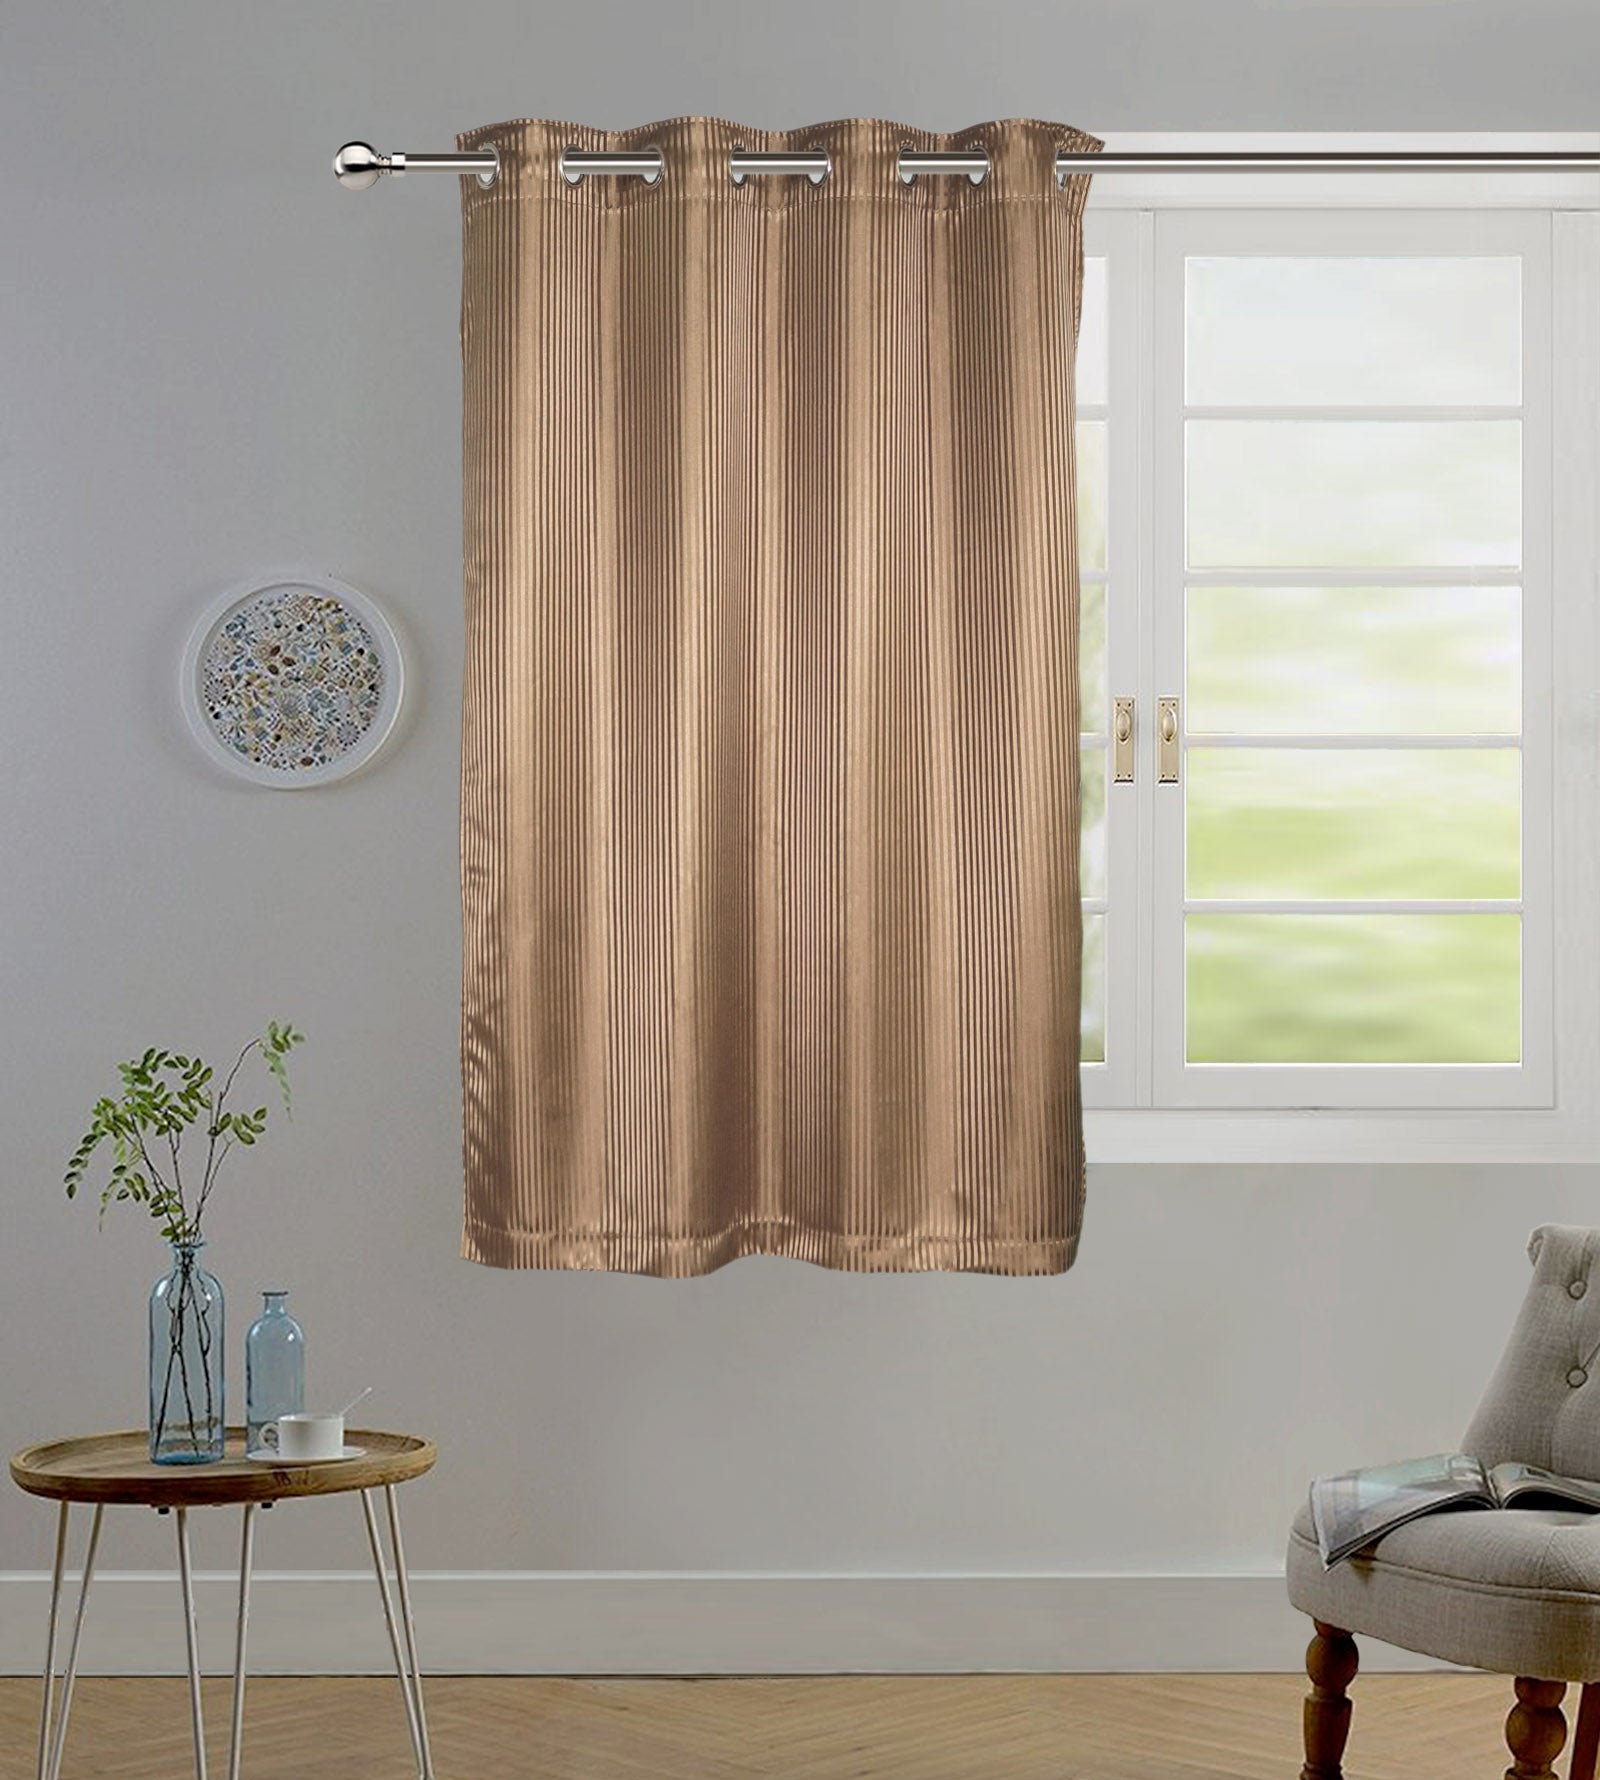 Lushomes Satin Curtains, Brown Satin window curtains, Striped, curtains 5 feet, 8 Metal SS Eyelets, 4.5 FT x 5 FT, curtains for window (54 x 60 inches, Single pc)